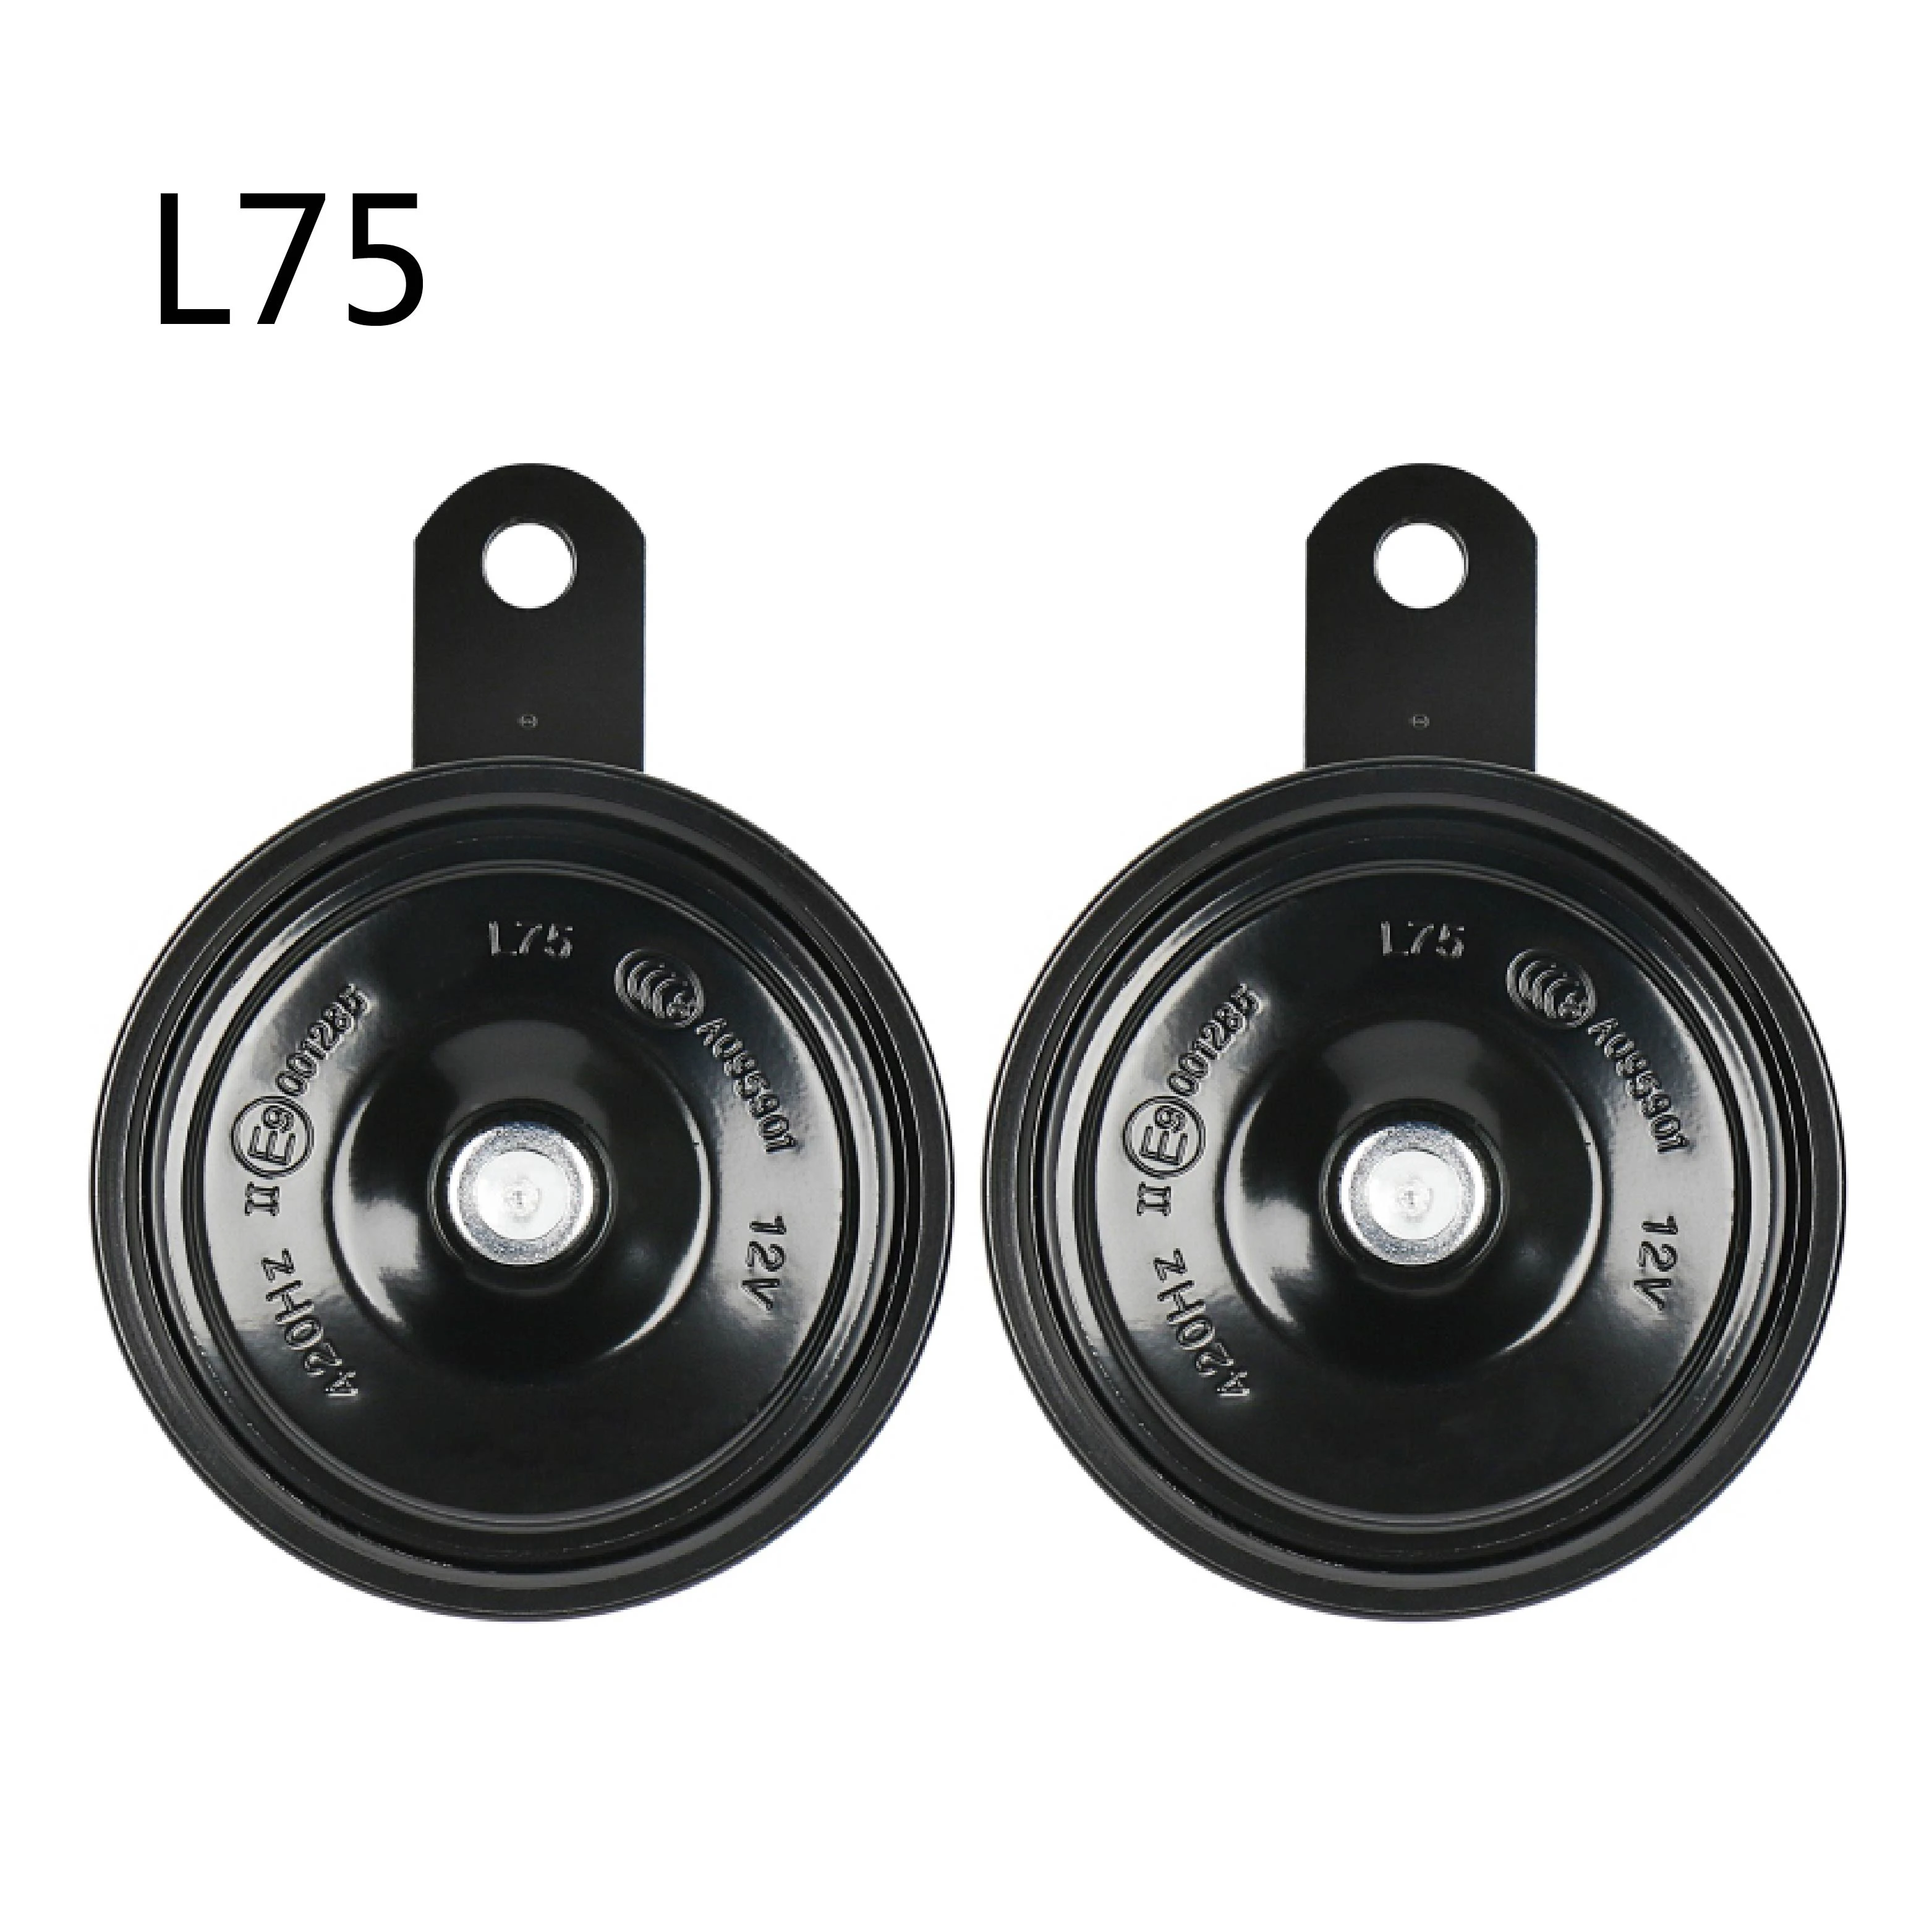 12V universal car horn with good sound popular in India